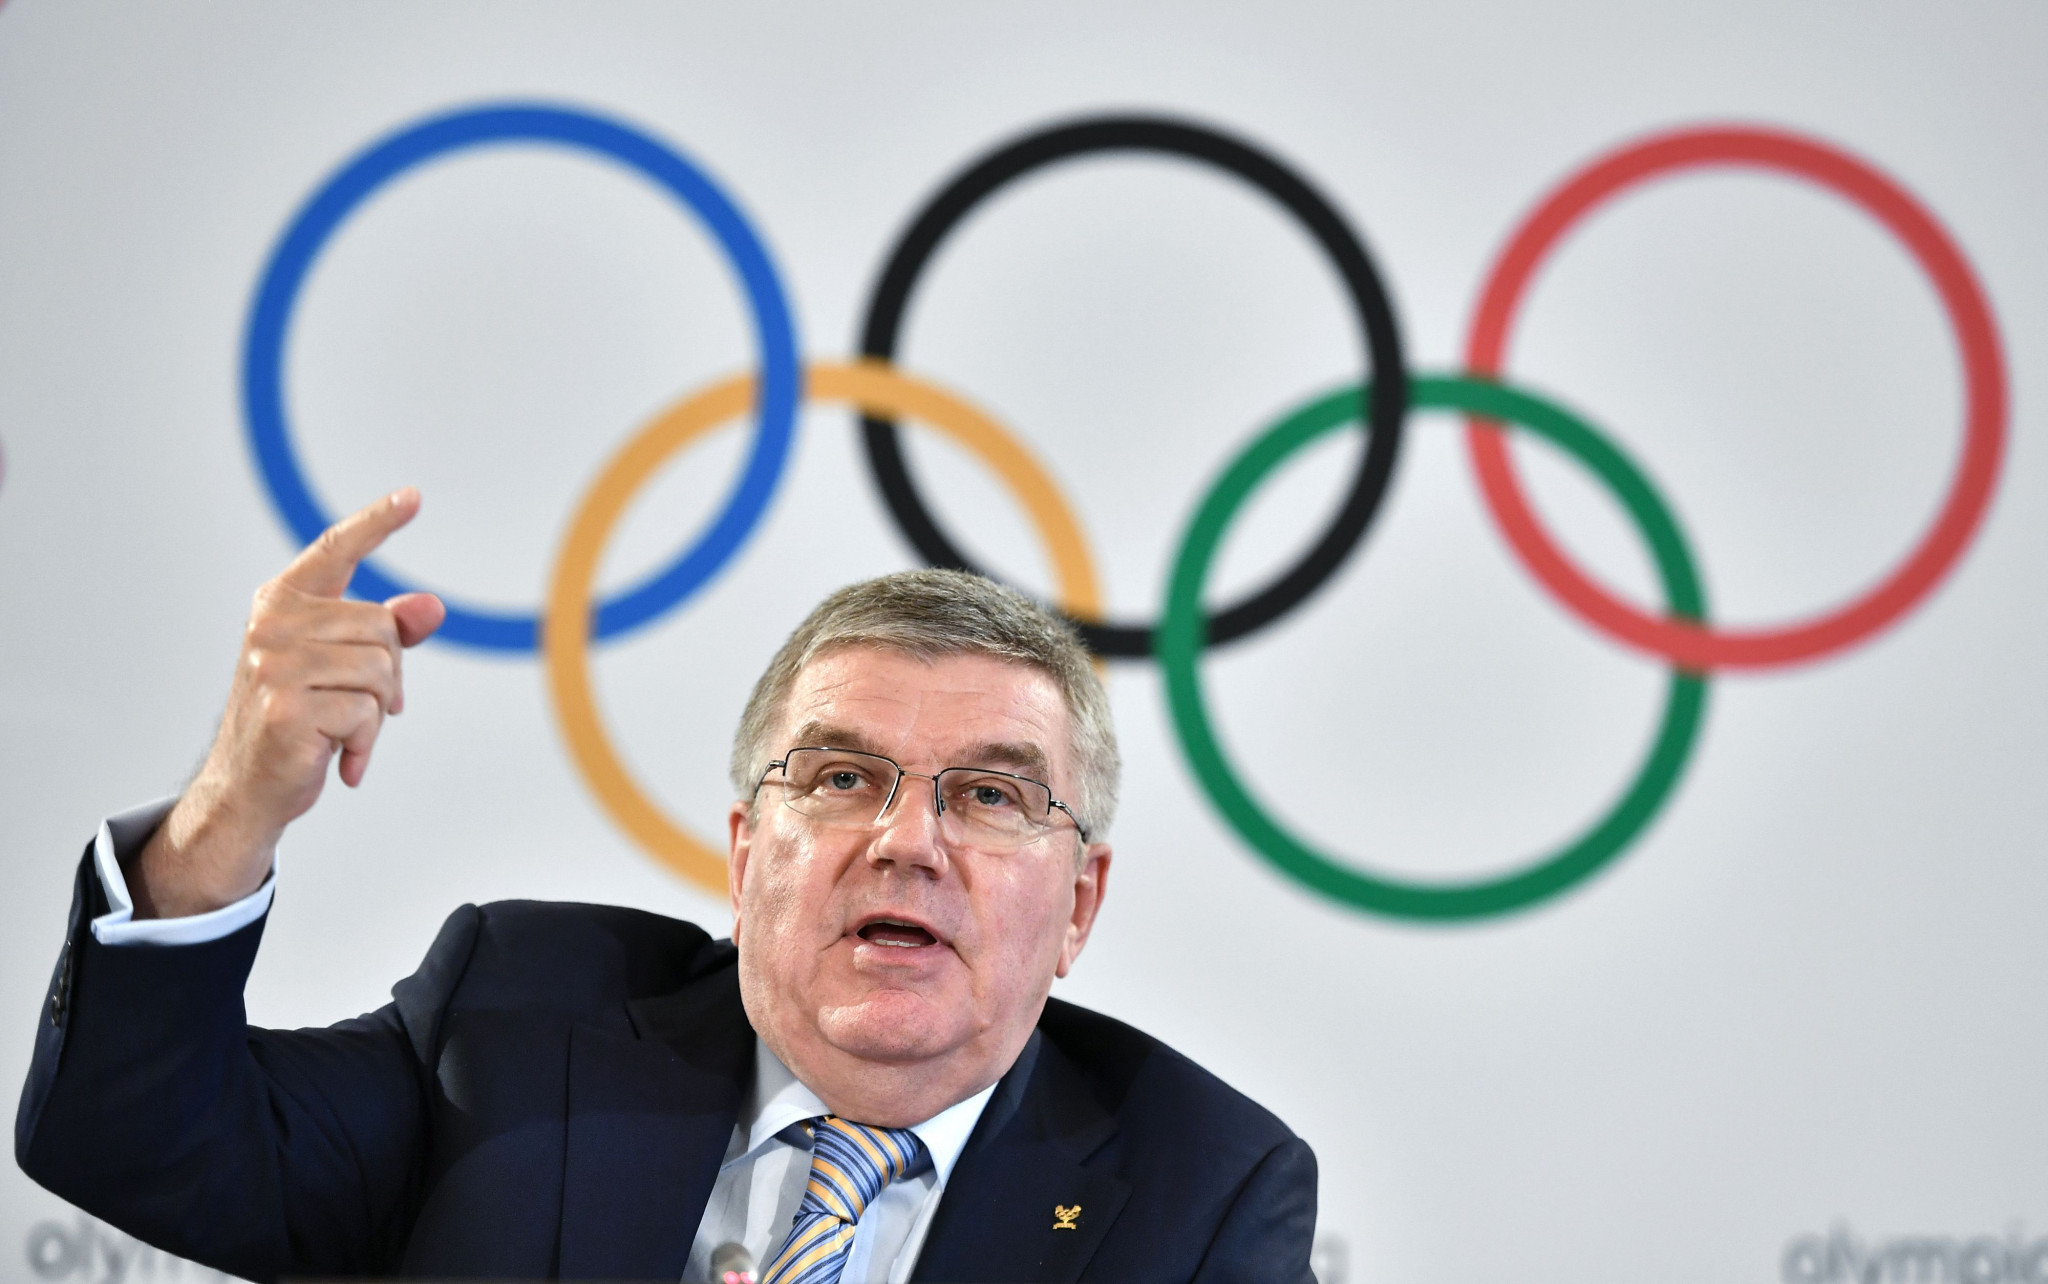 International Olympic Committee President Thomas Bach has revealed that the organisation has accepted the idea of holding the Tokyo 2020 Olympic flame lighting ceremony on March 11 of that year ©Getty Images 